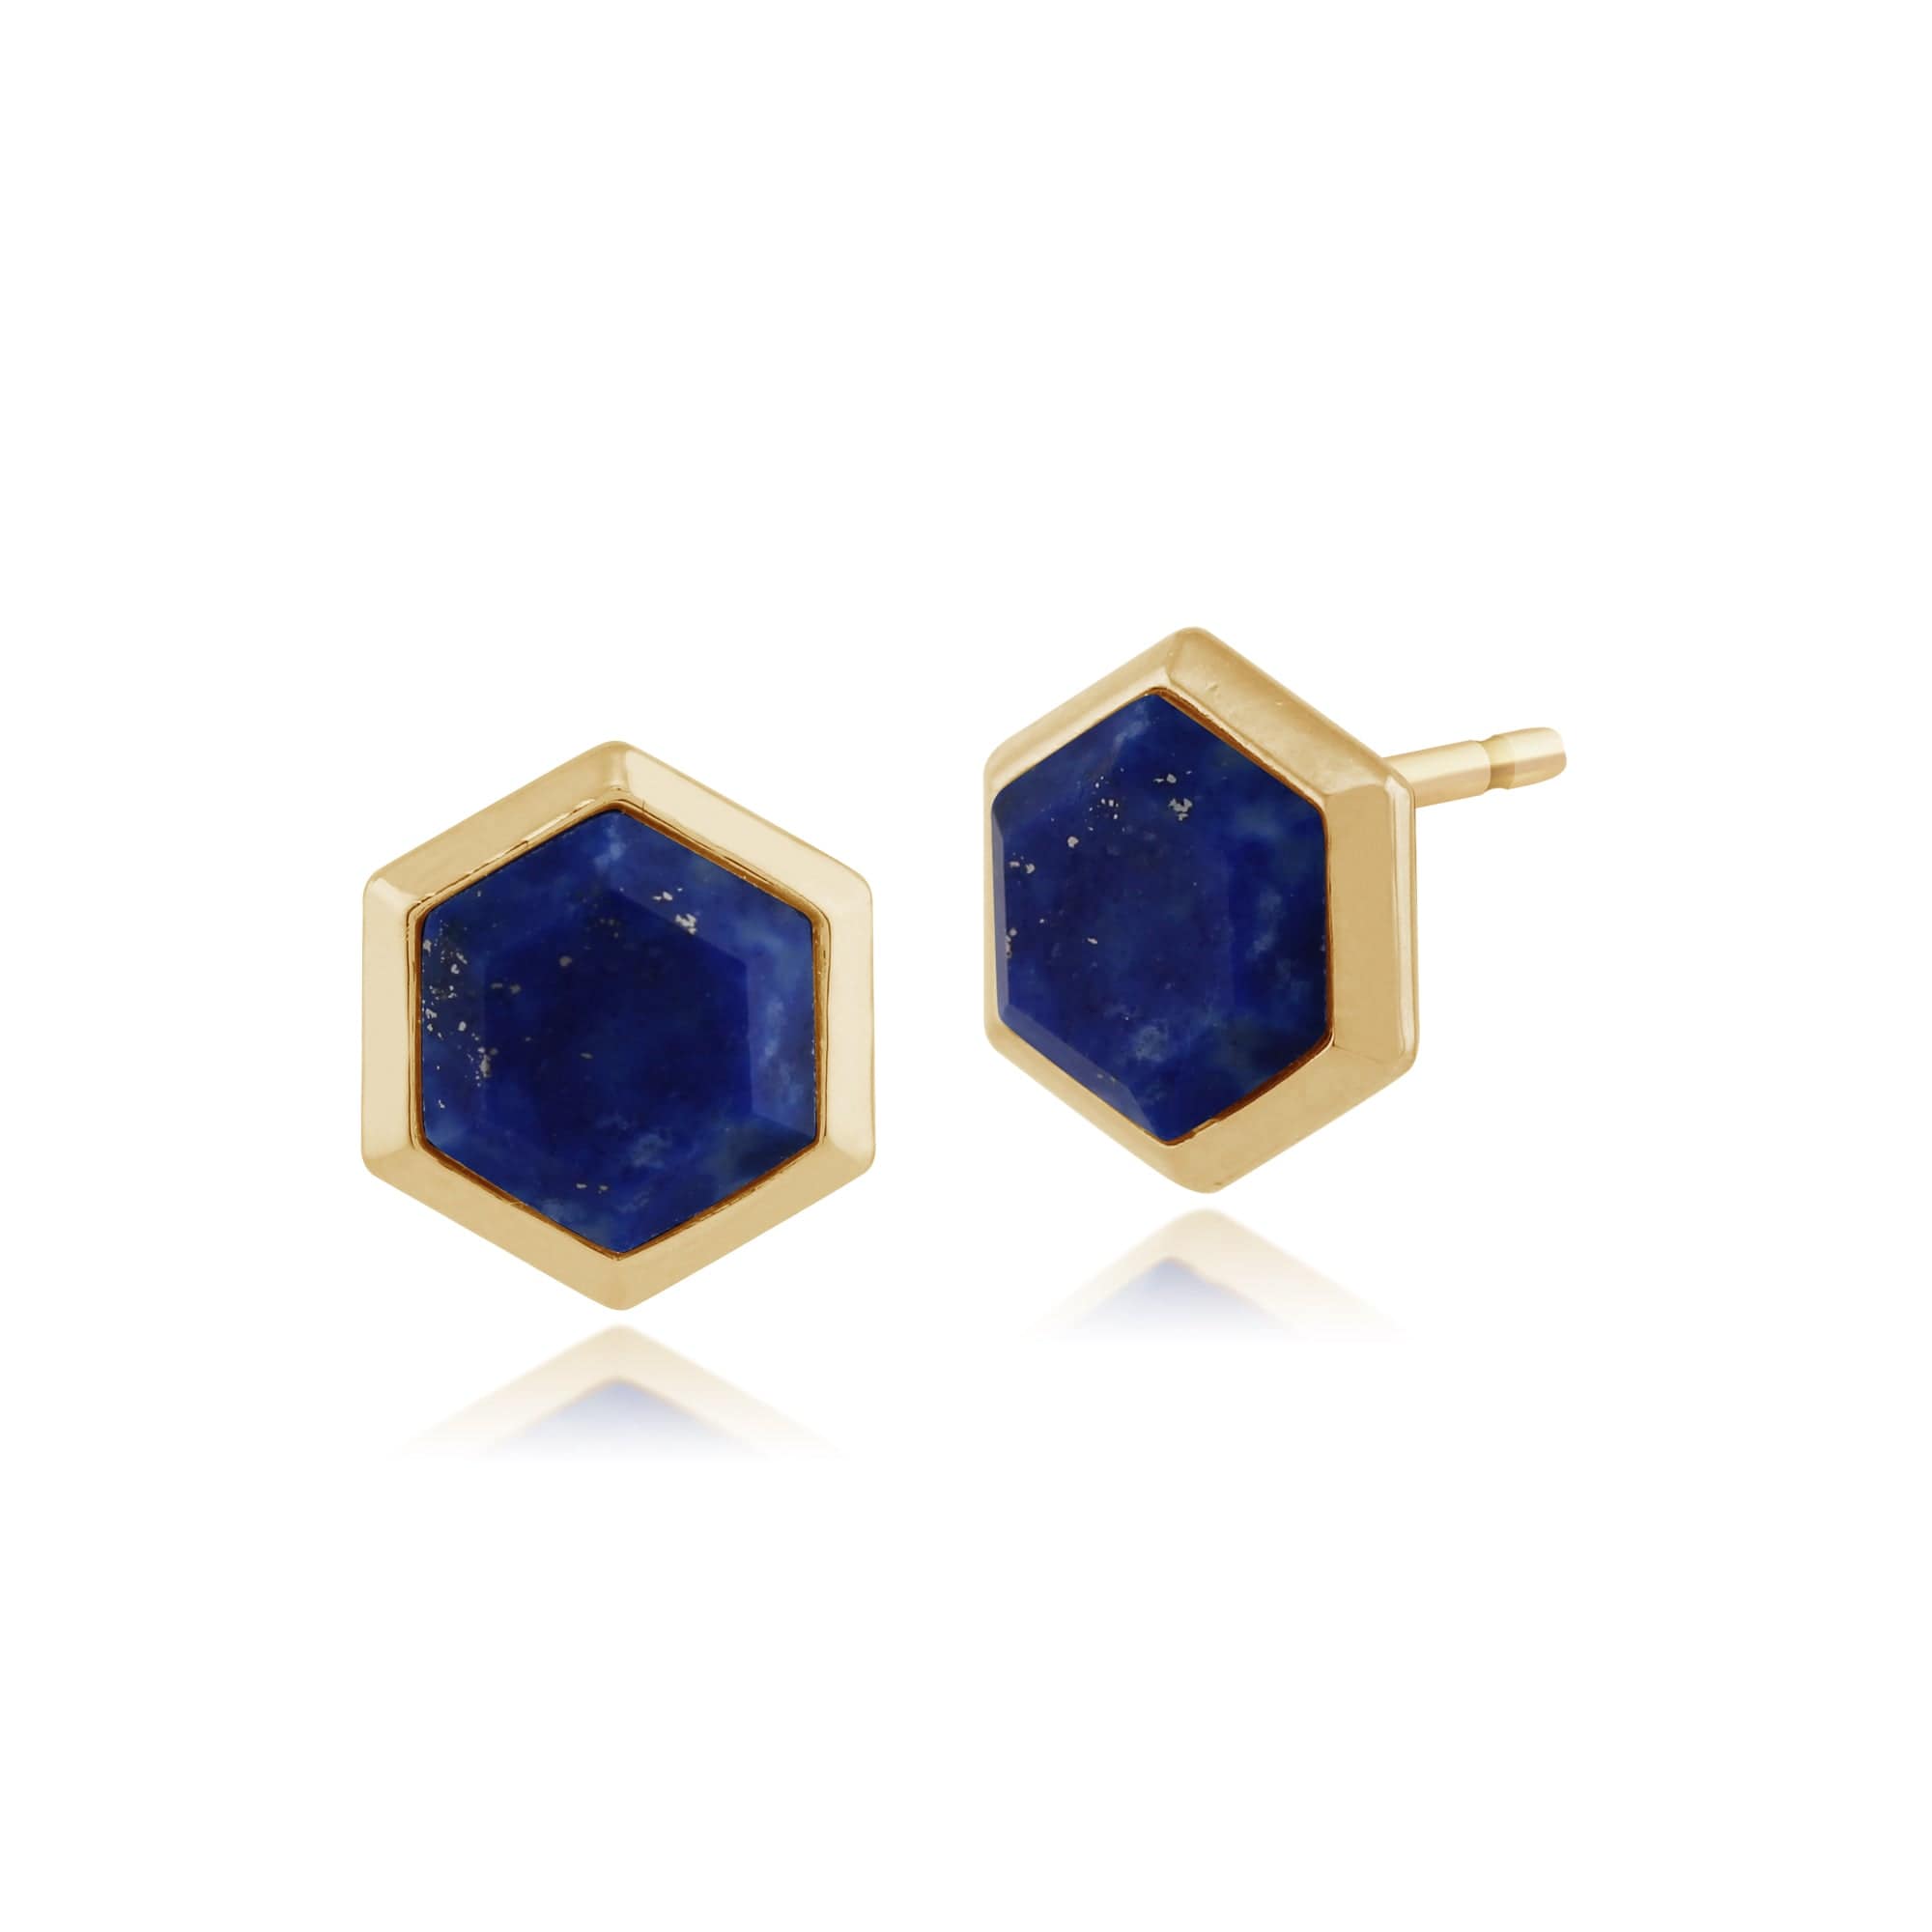 Geometric Hexagon Lapis Lazuli Prism Stud Earrings in Gold Plated Silver